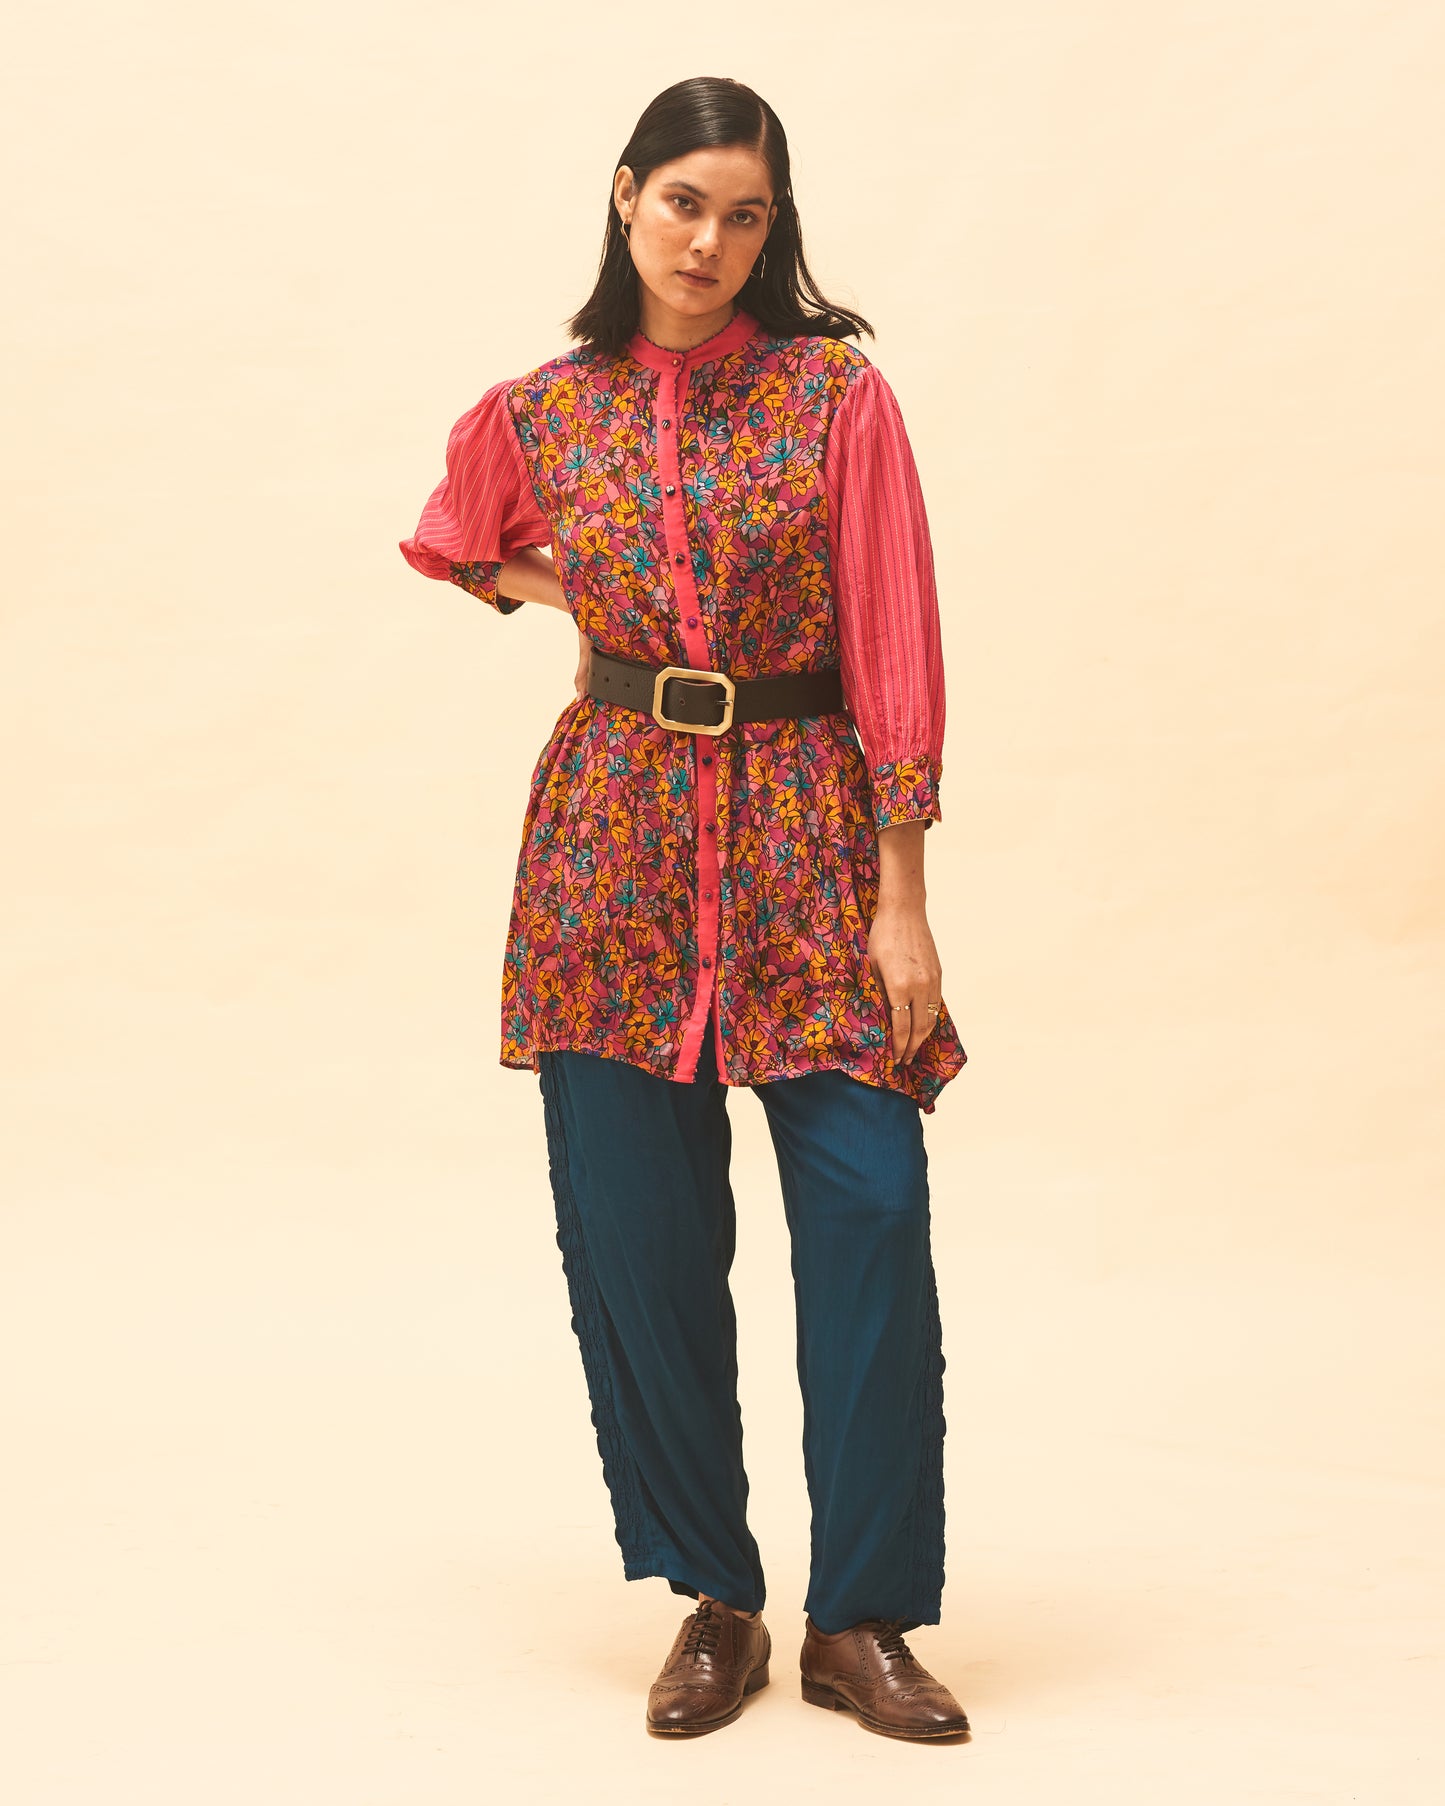 Fuchsia Floral Top With Indigo Panelled Pants